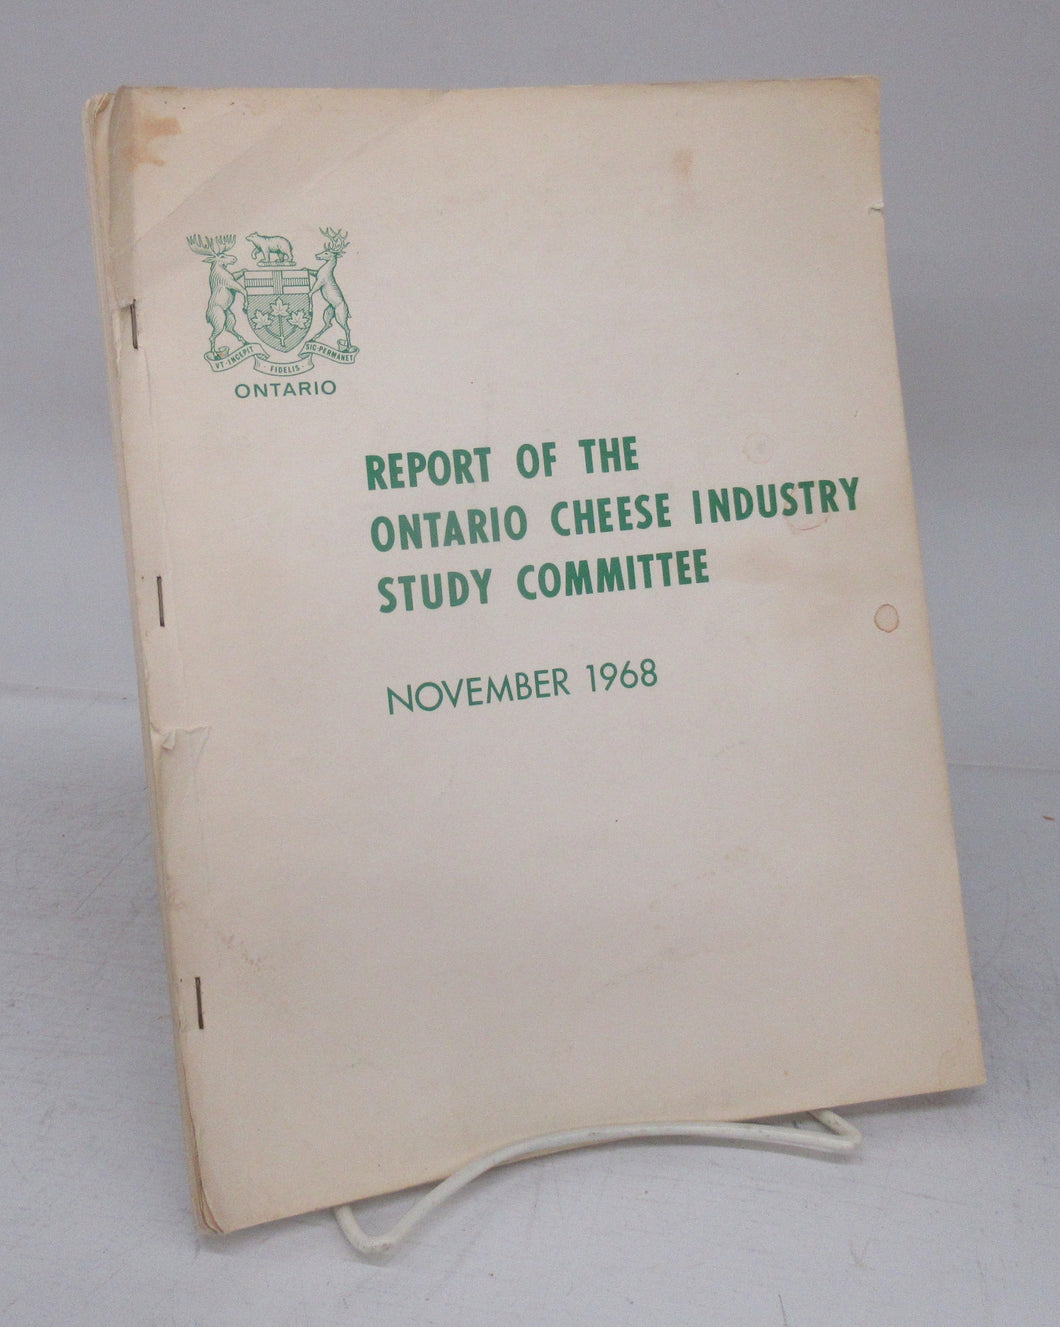 Report of the Ontario Cheese Industry Study Committee, November 1968